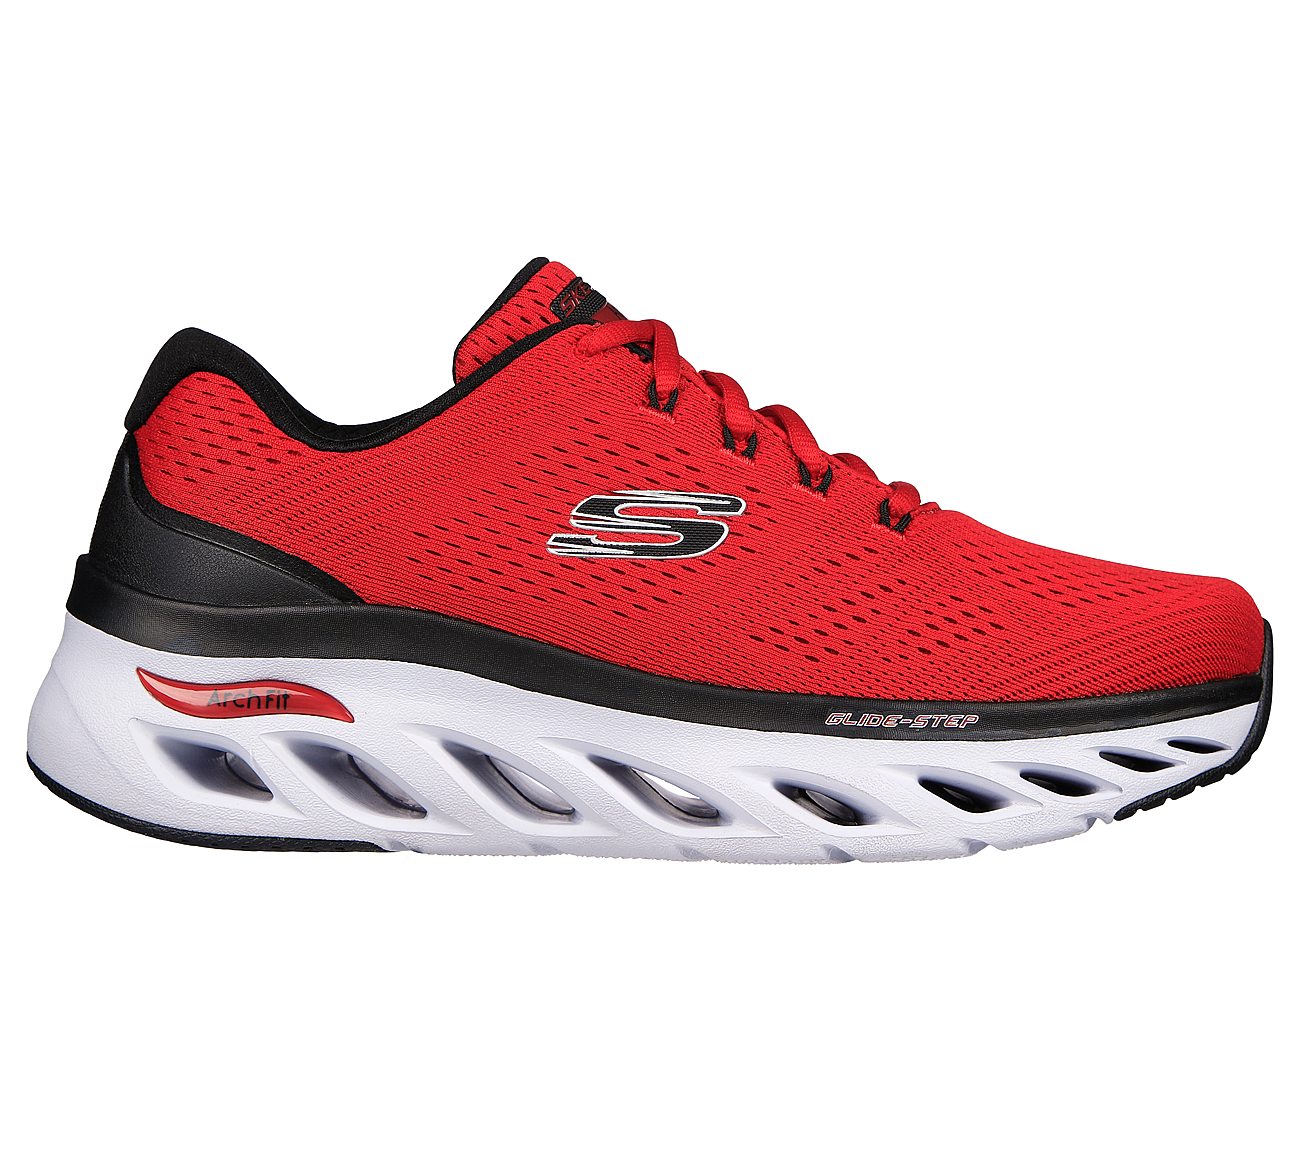 ARCH FIT GLIDE-STEP, RED/BLACK Footwear Lateral View